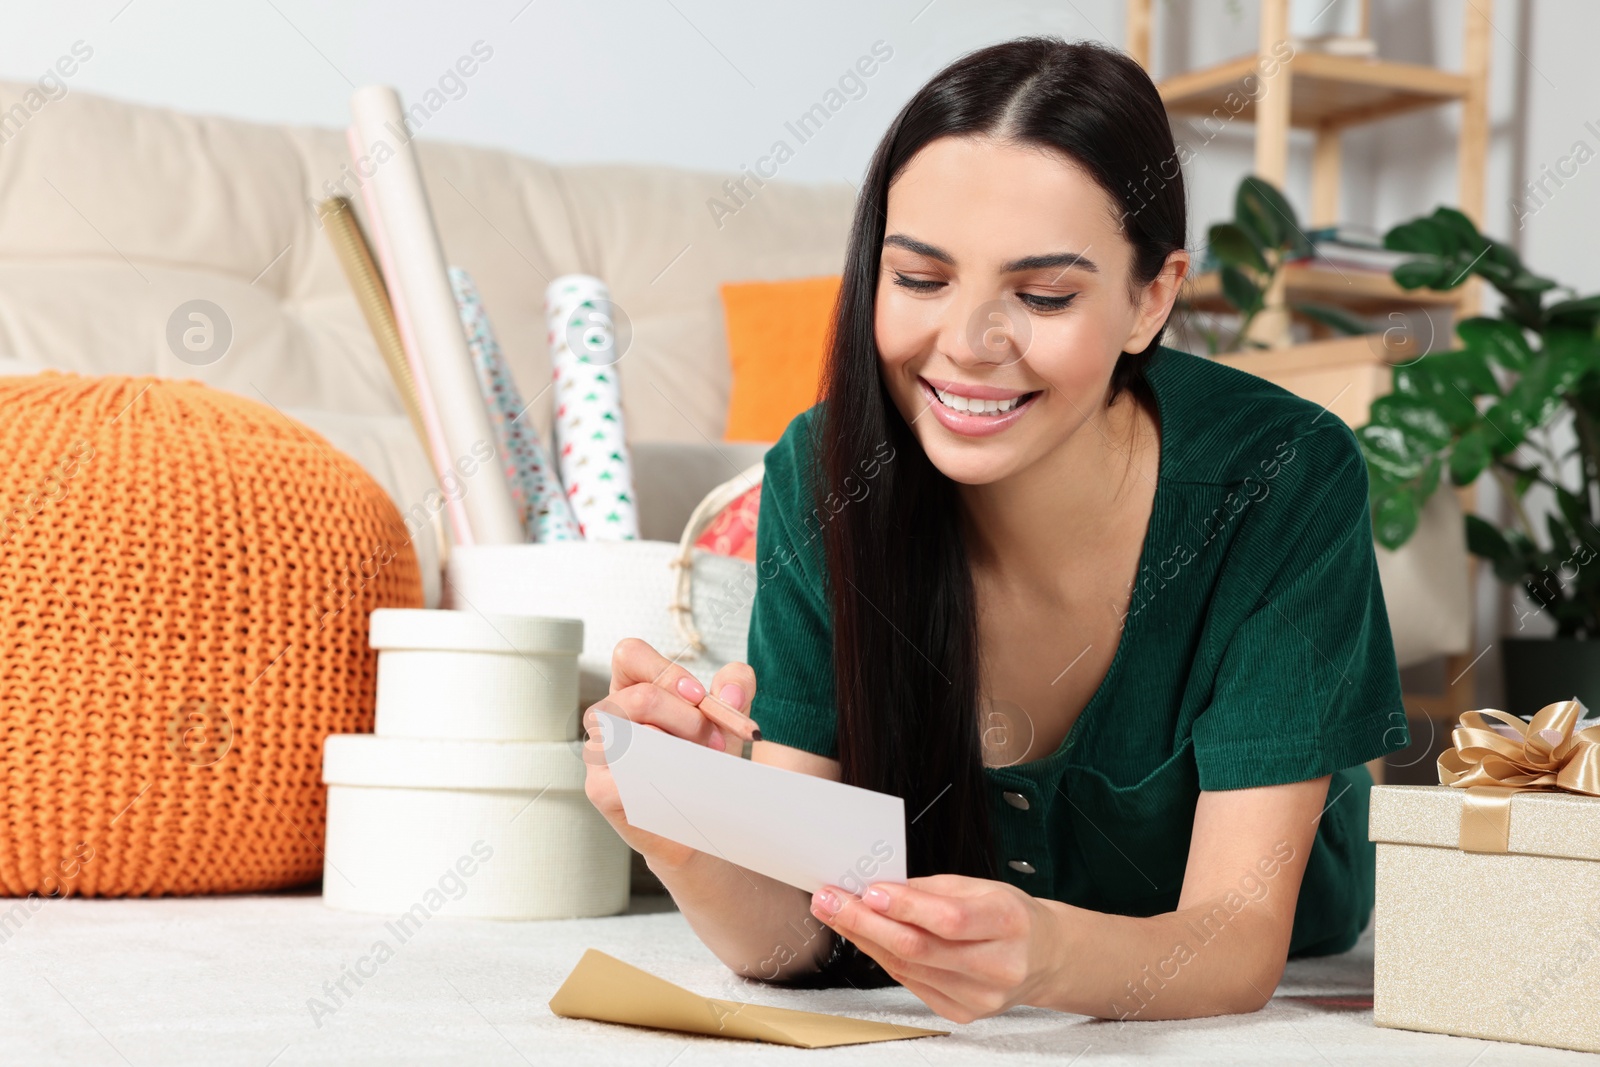 Photo of Happy woman writing message in greeting card on floor in living room